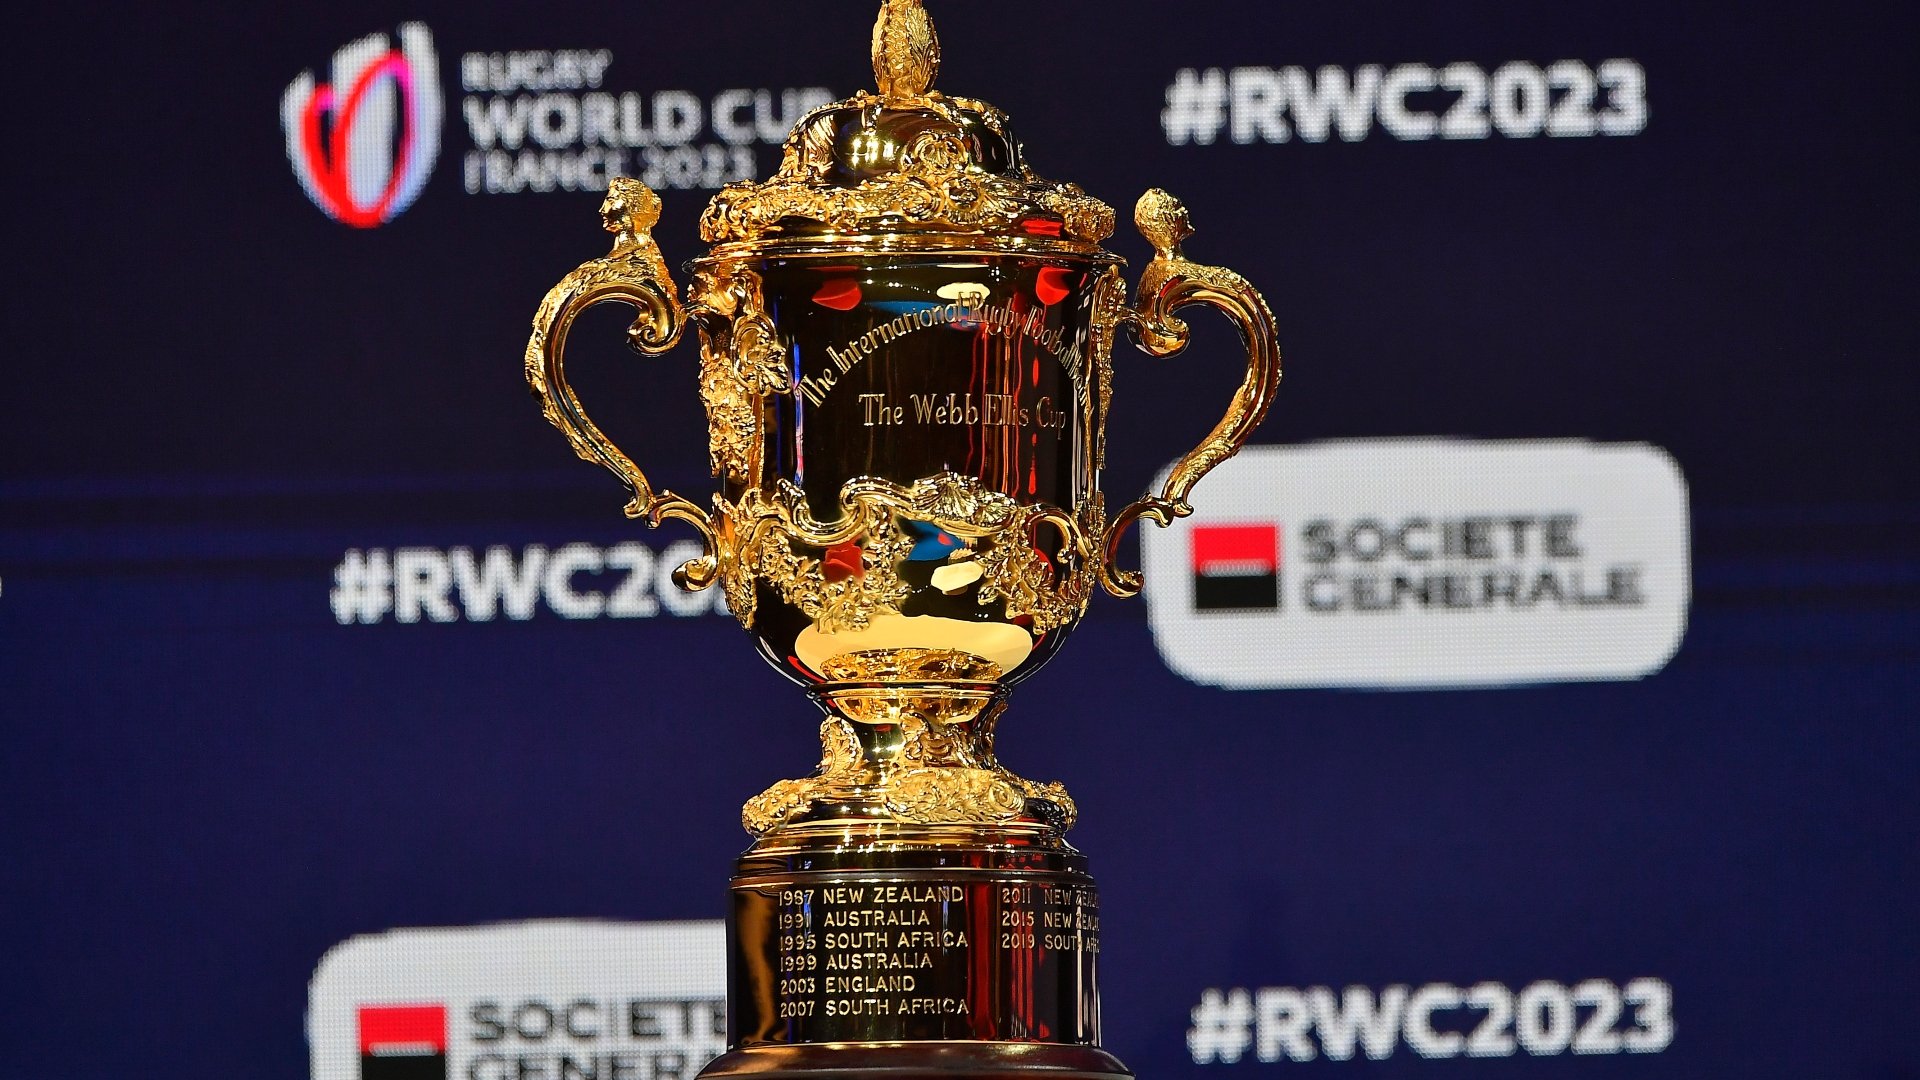 Rugby World Cup tickets on sale: France 2023